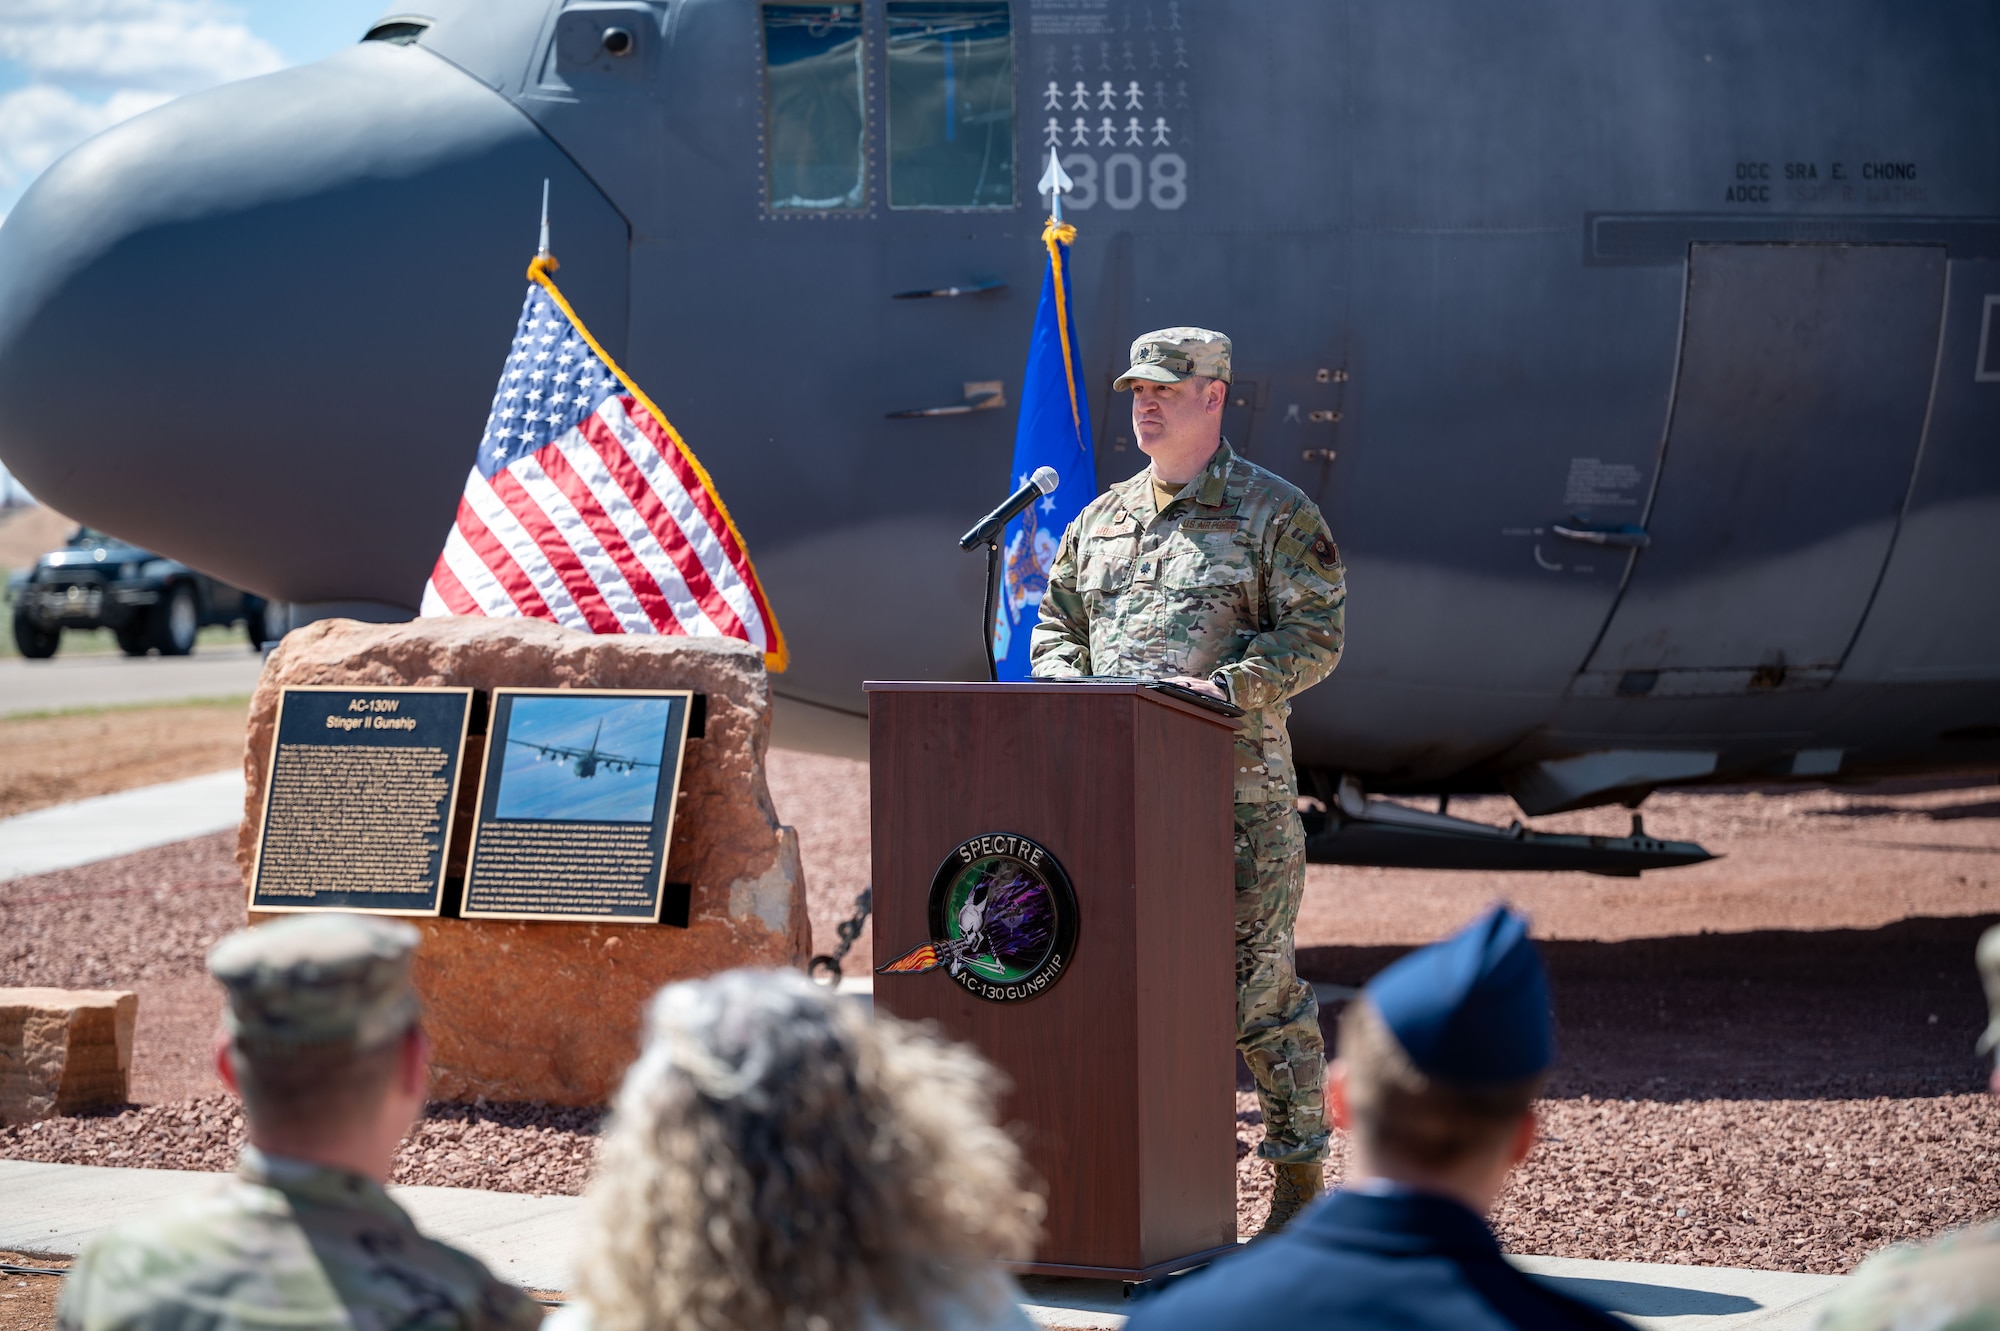 U.S. Air Force Lt. Col. Thomas Moncure, 16th Special Operations Squadron commander, discusses the history of the AC-130W Stinger II gunship during the static display unveiling ceremony at Cannon Air Force Base, New Mexico, March 21, 2024. The AC-130W flew its final combat mission as the last American forces departed Kabul, Afghanistan in August, 2021. (U.S. Air Force photo by 2nd Lt. Charles Moye)